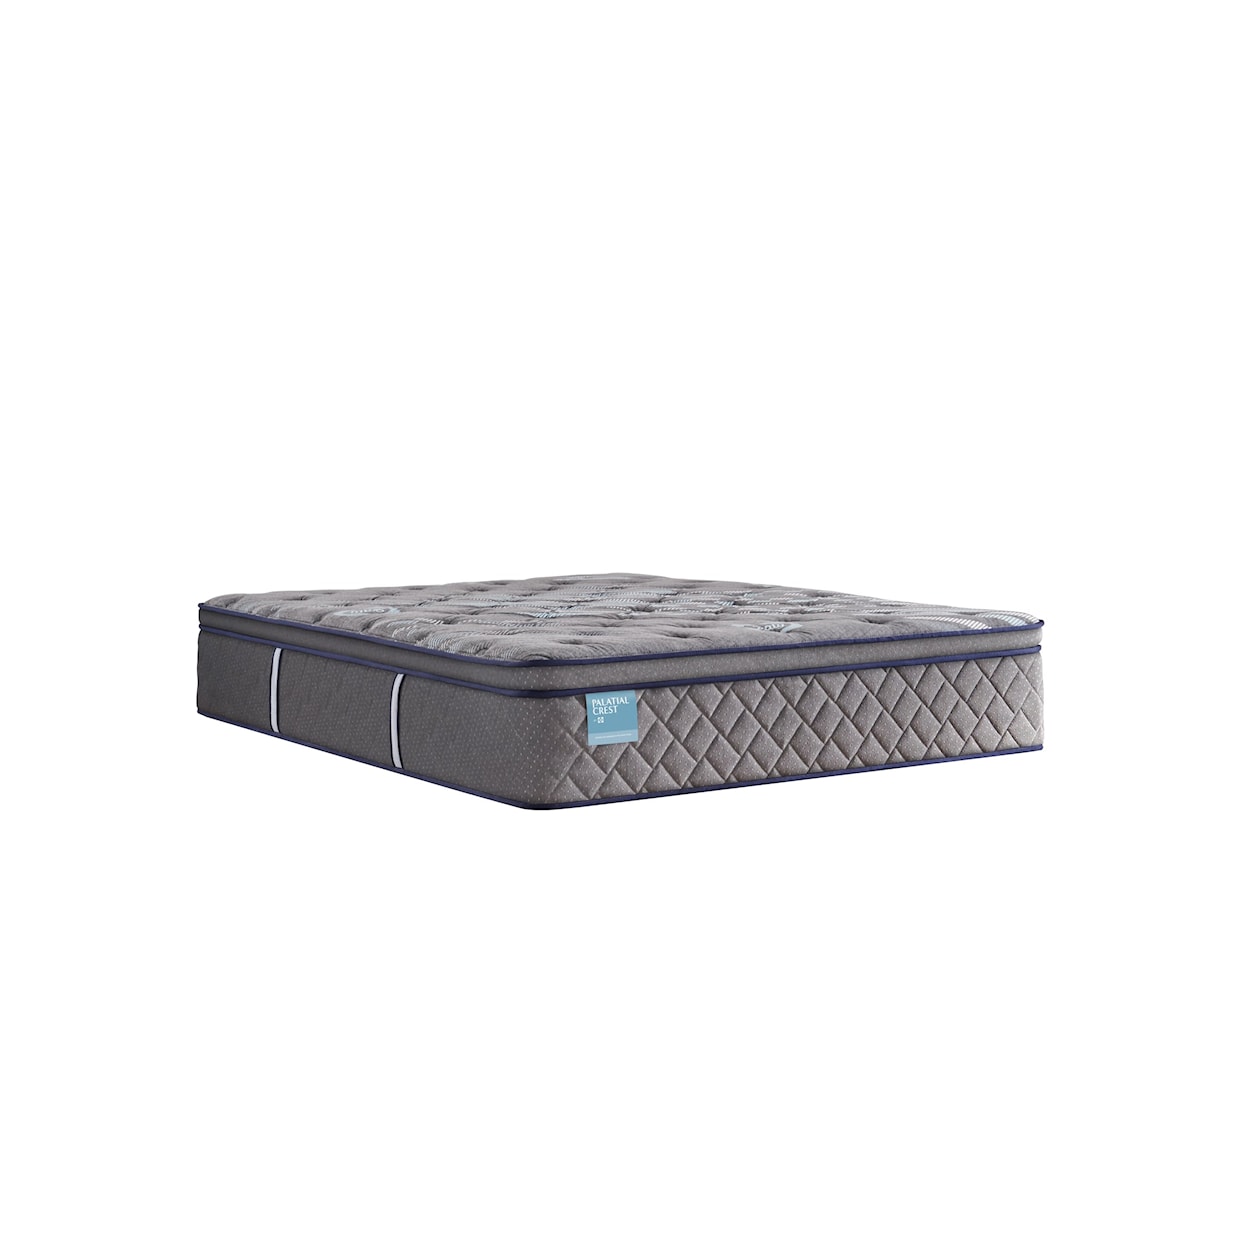 Sealy Palatial Crest S6 Cathedral Cove Soft EPT King Mattress